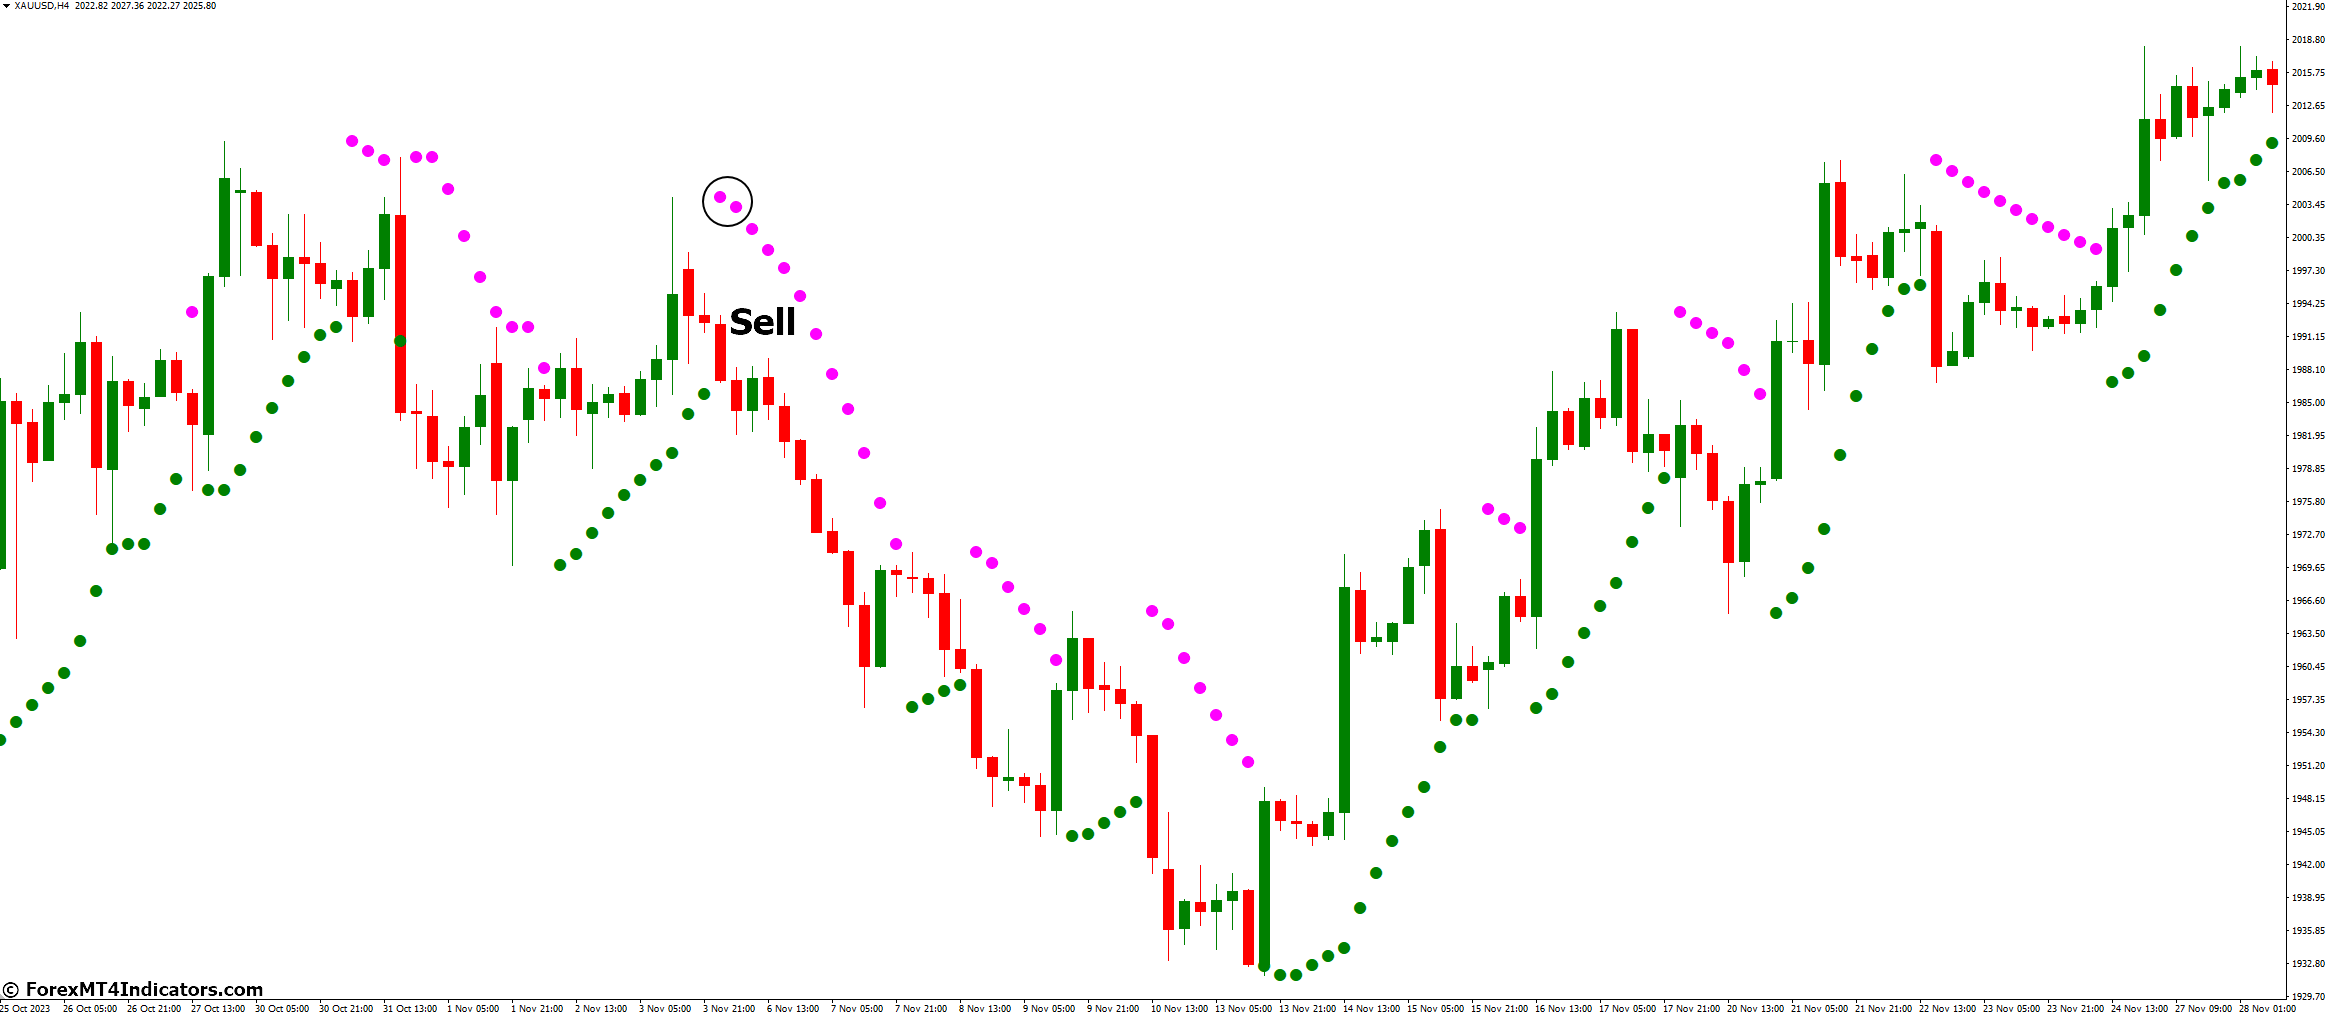 How to Trade with SAR Color Indicator - Sell Entry